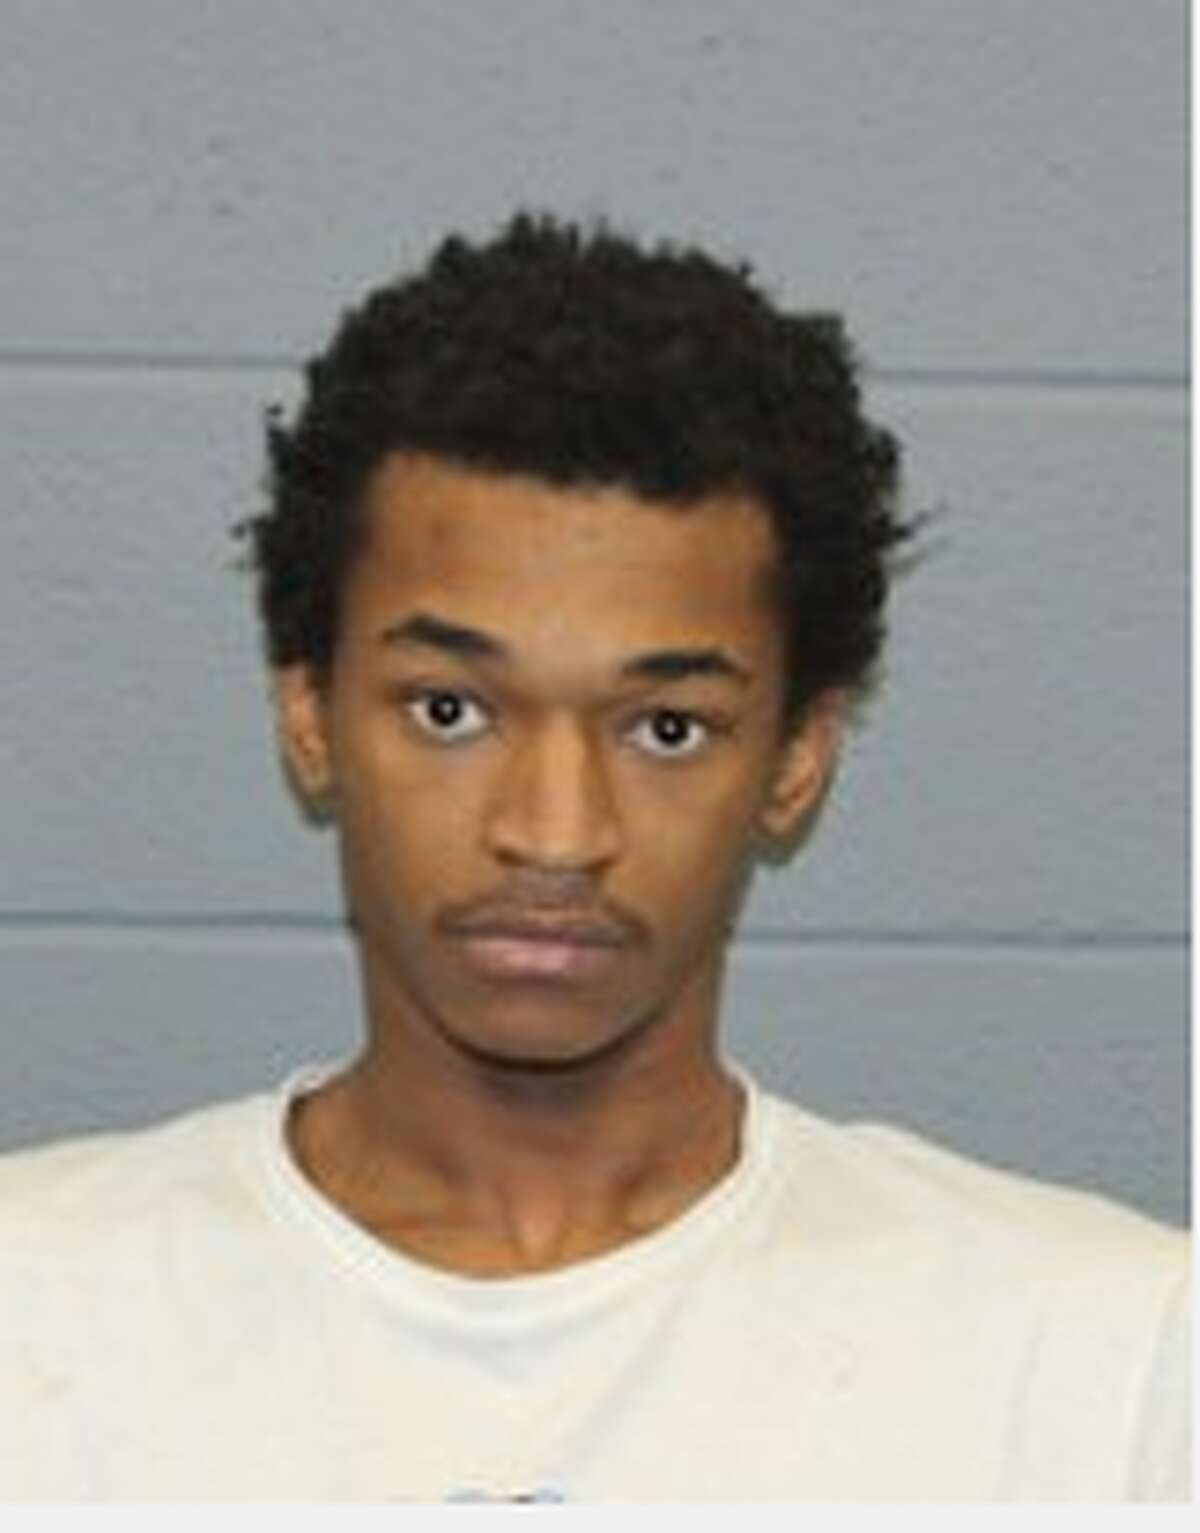 Ervin Barr, 21, of Waterbury, was found in a stolen Audi SUV Monday afternoon after an older woman reported her purse was snatched in a Walmart parking lot, according to Waterbury police.